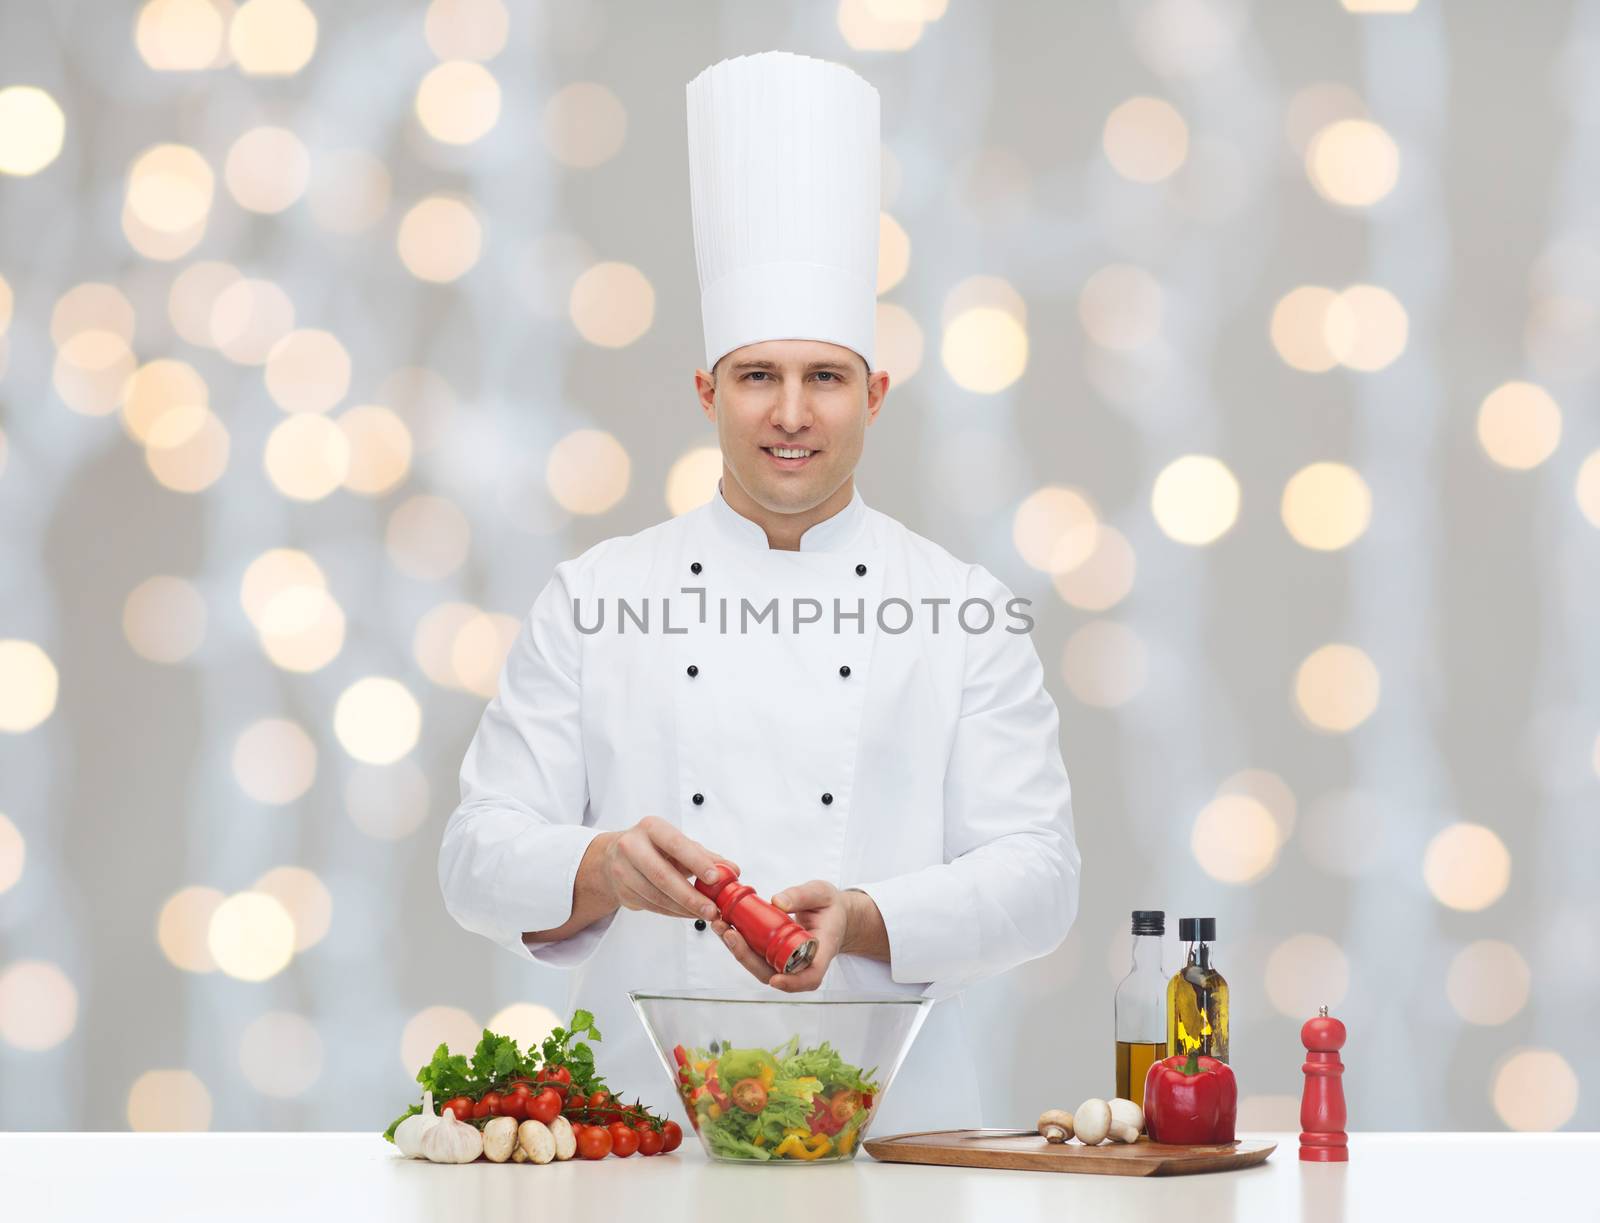 profession, vegetarian, food and people concept - happy male chef cooking and seasoning vegetable salad over christmas holidays lights background